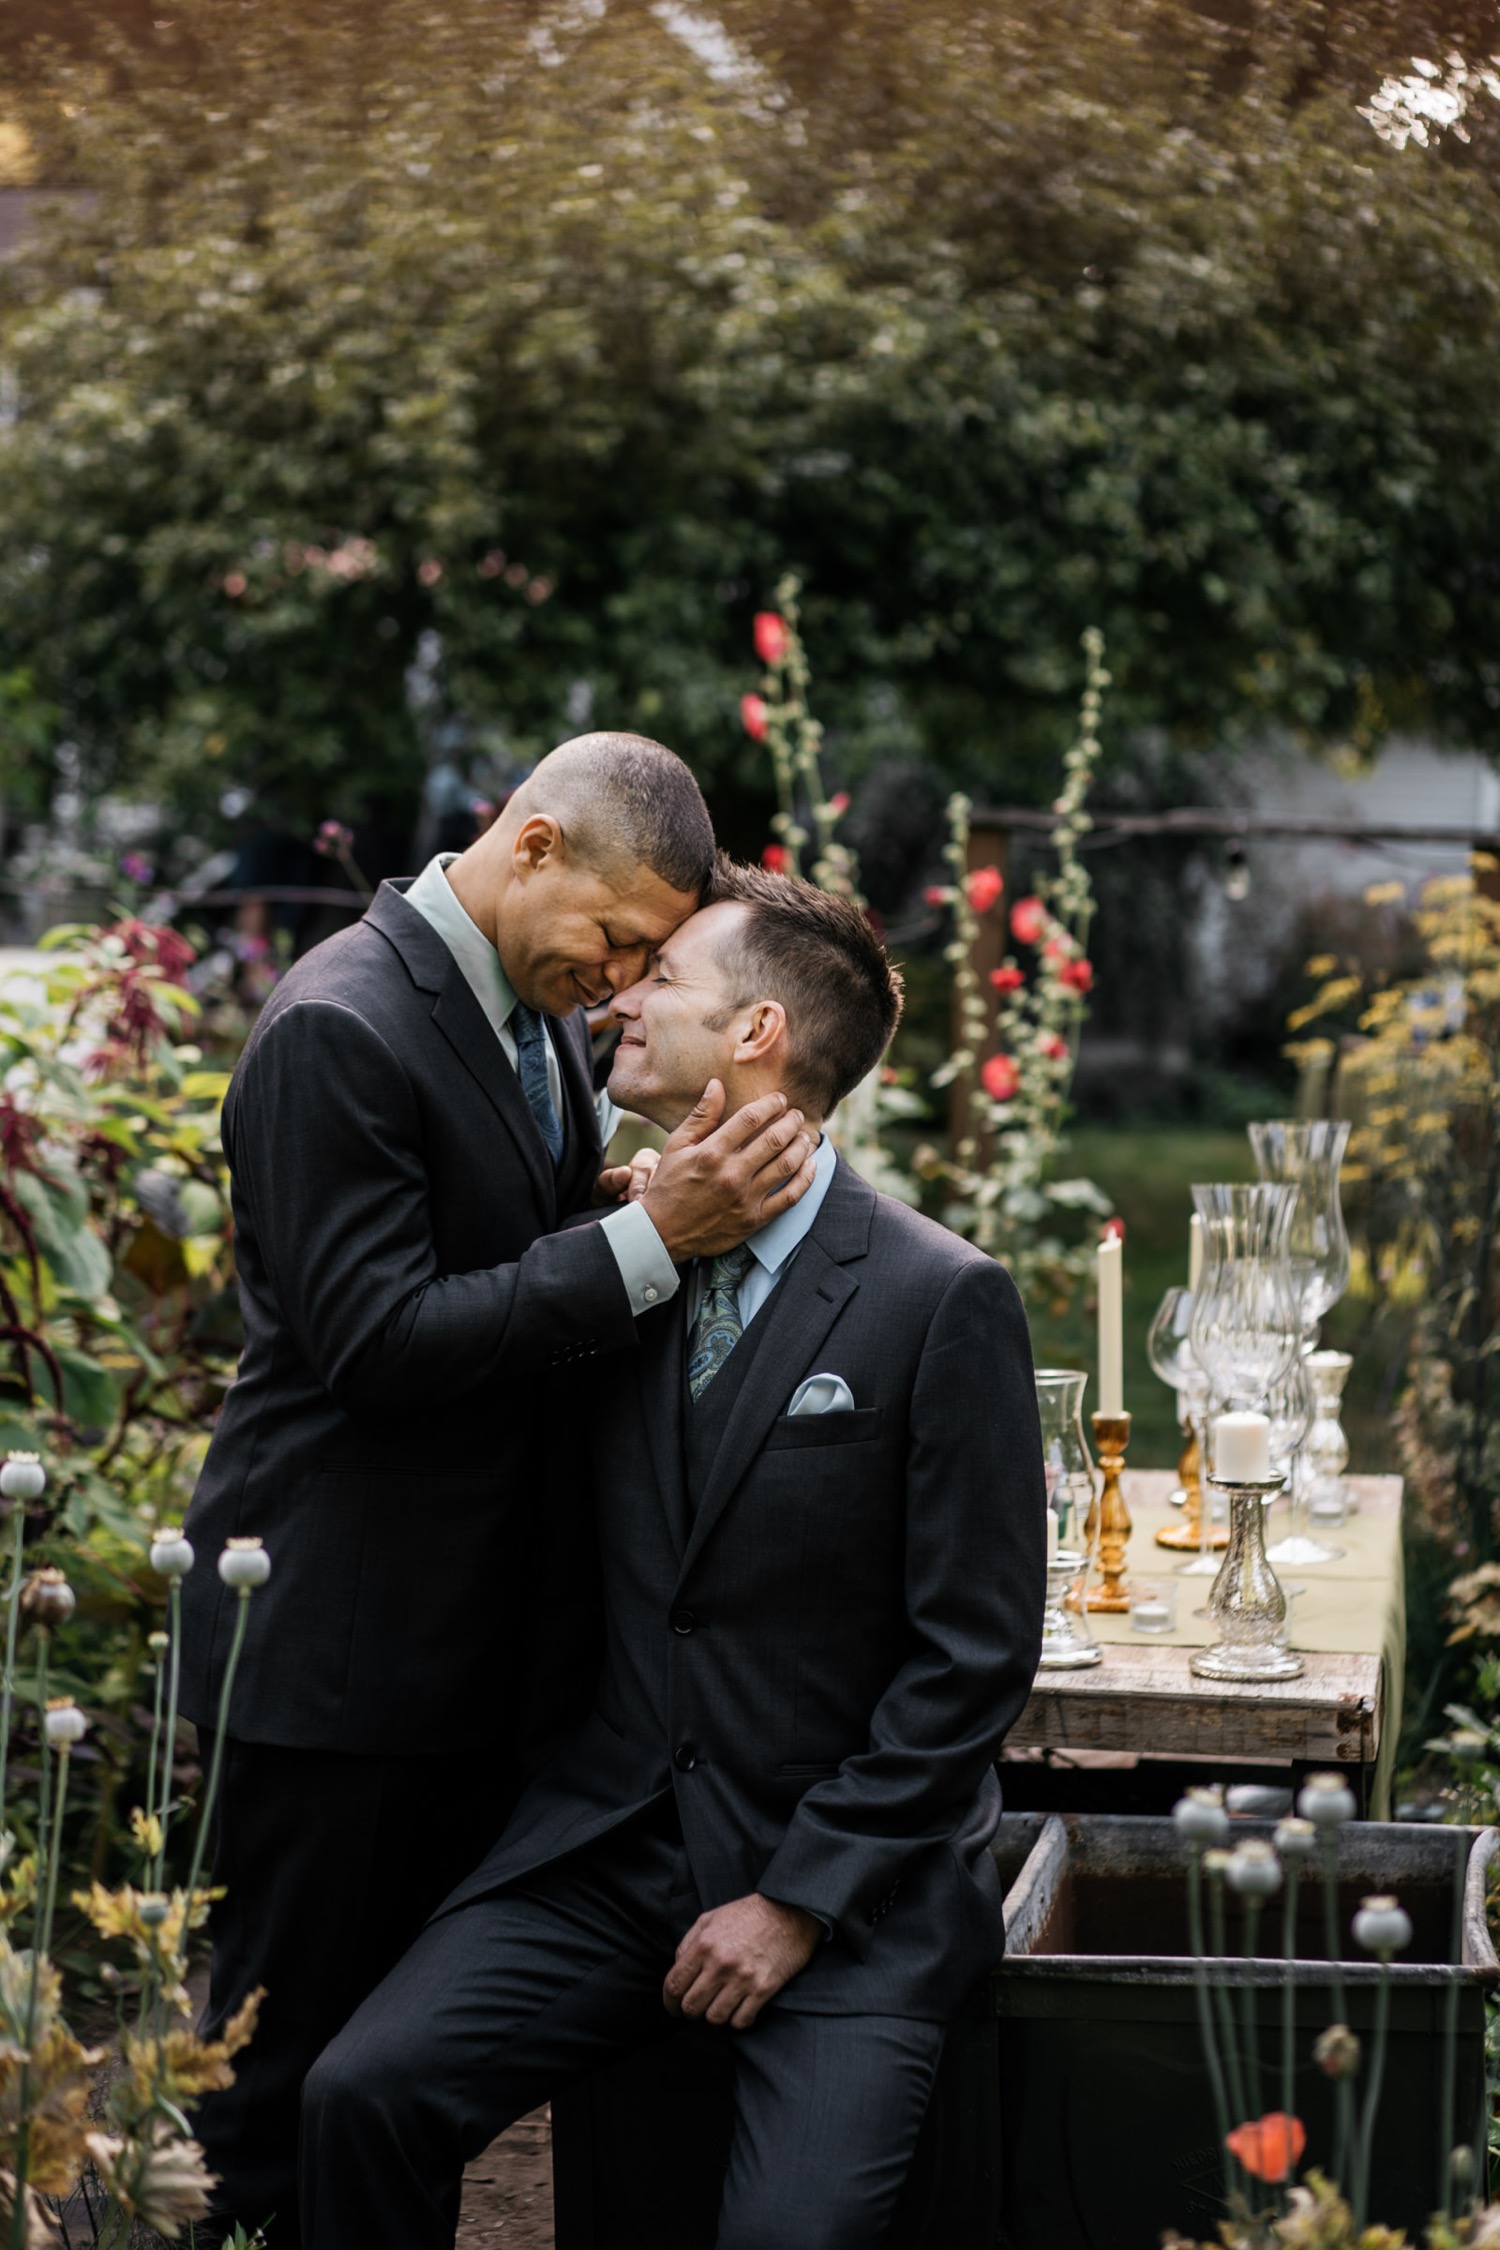 Two grooms taking couple portraits in the garden with good wedding lighting